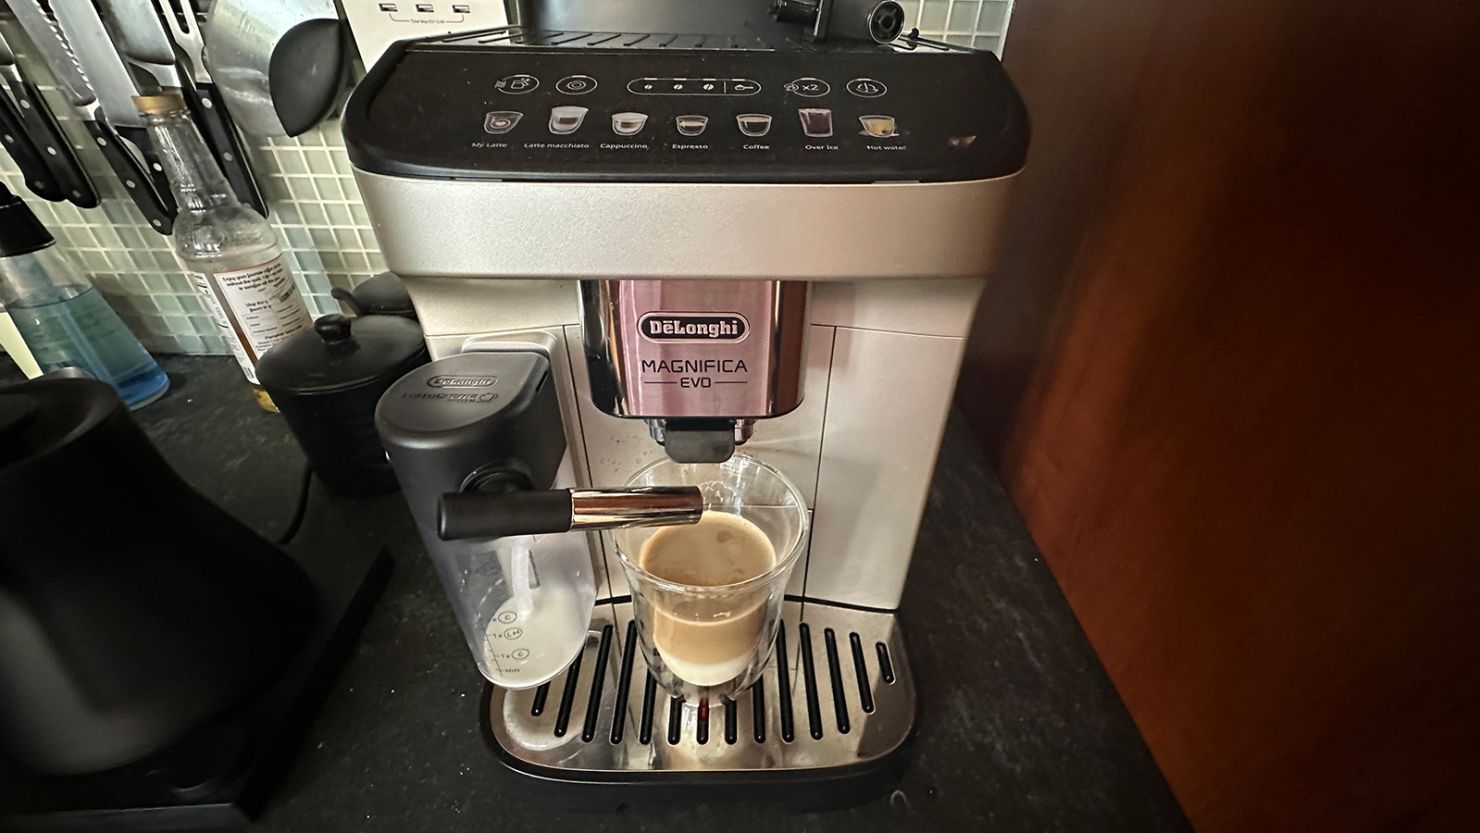 Philips 3200 LatteGo & Iced Coffee Machine Review With a Coffee